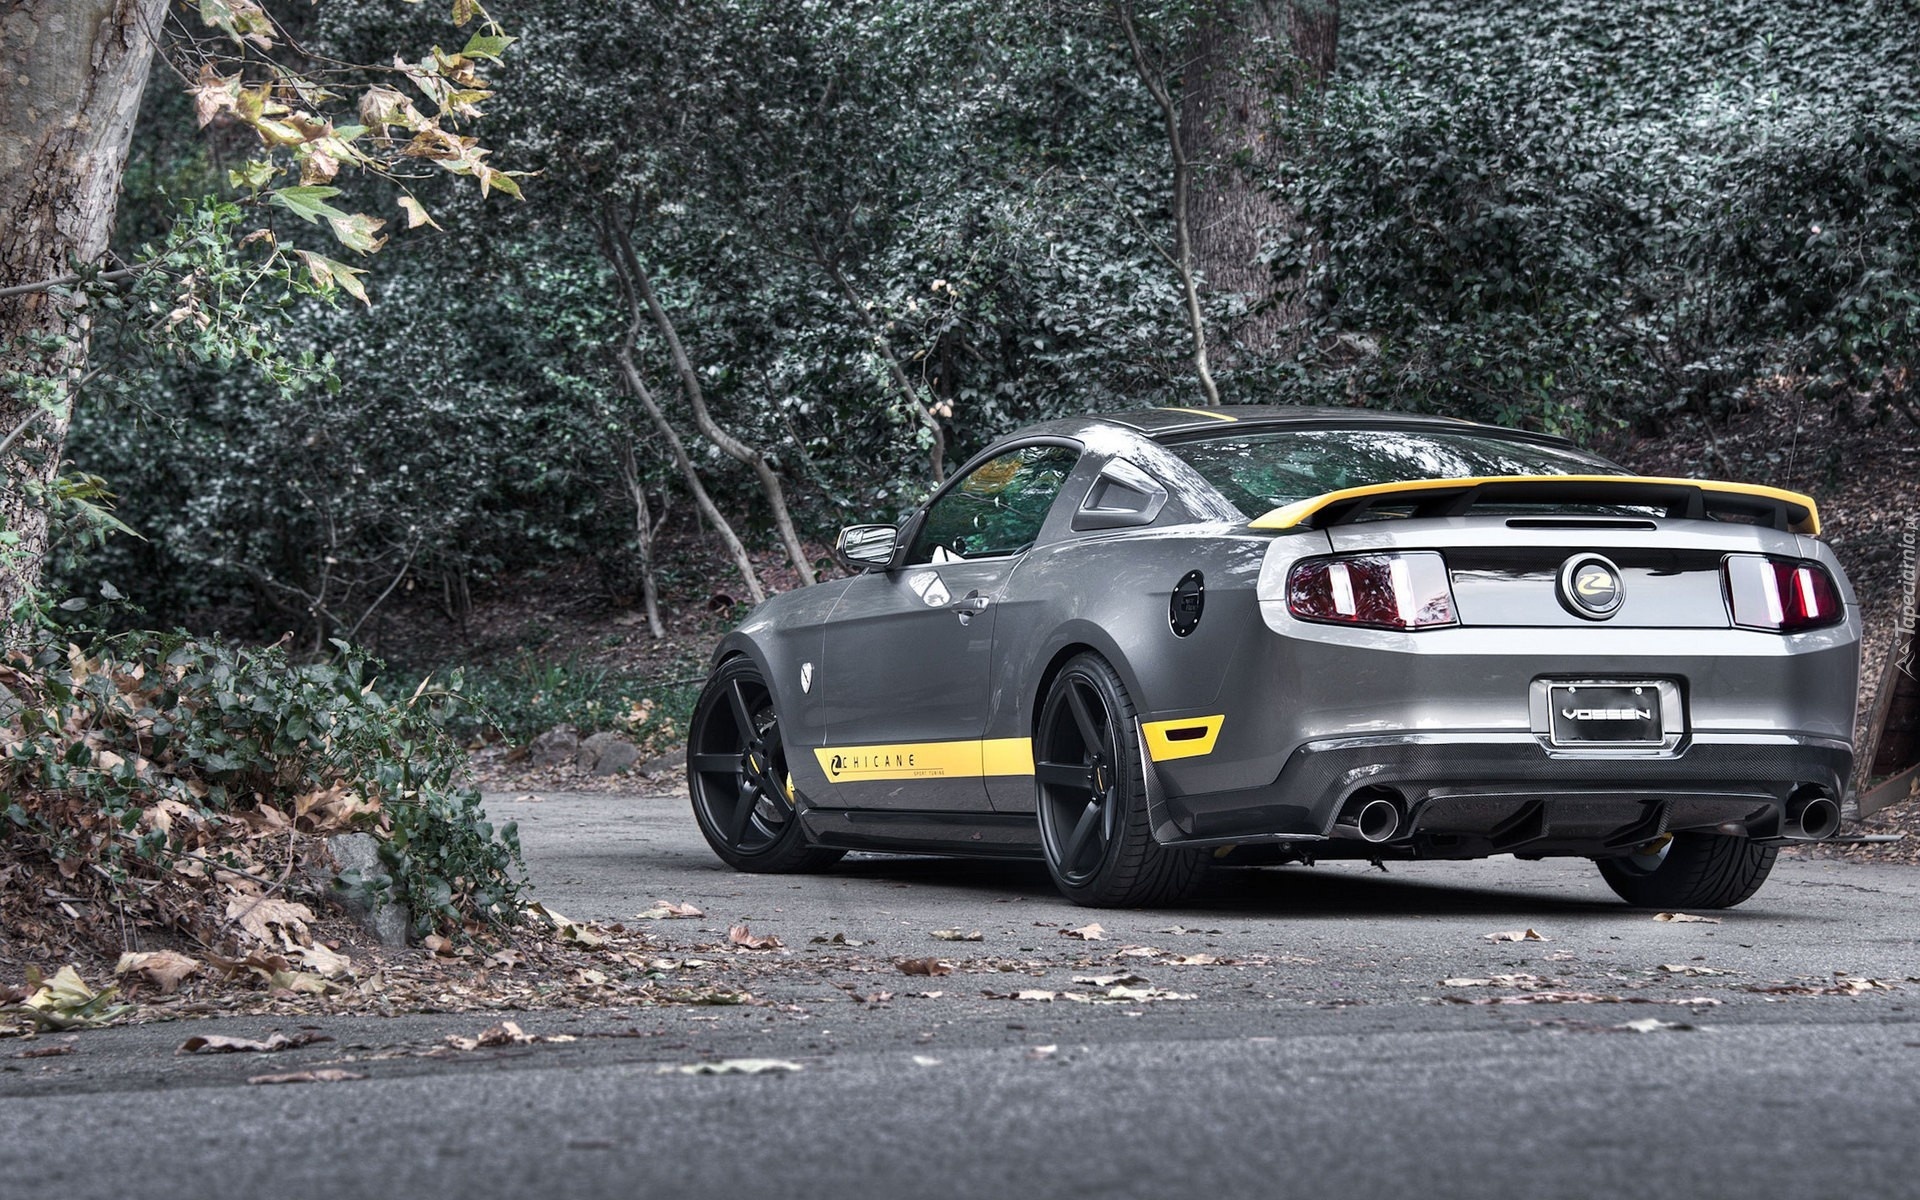 Ford, Mustang, Tuning, Chicane